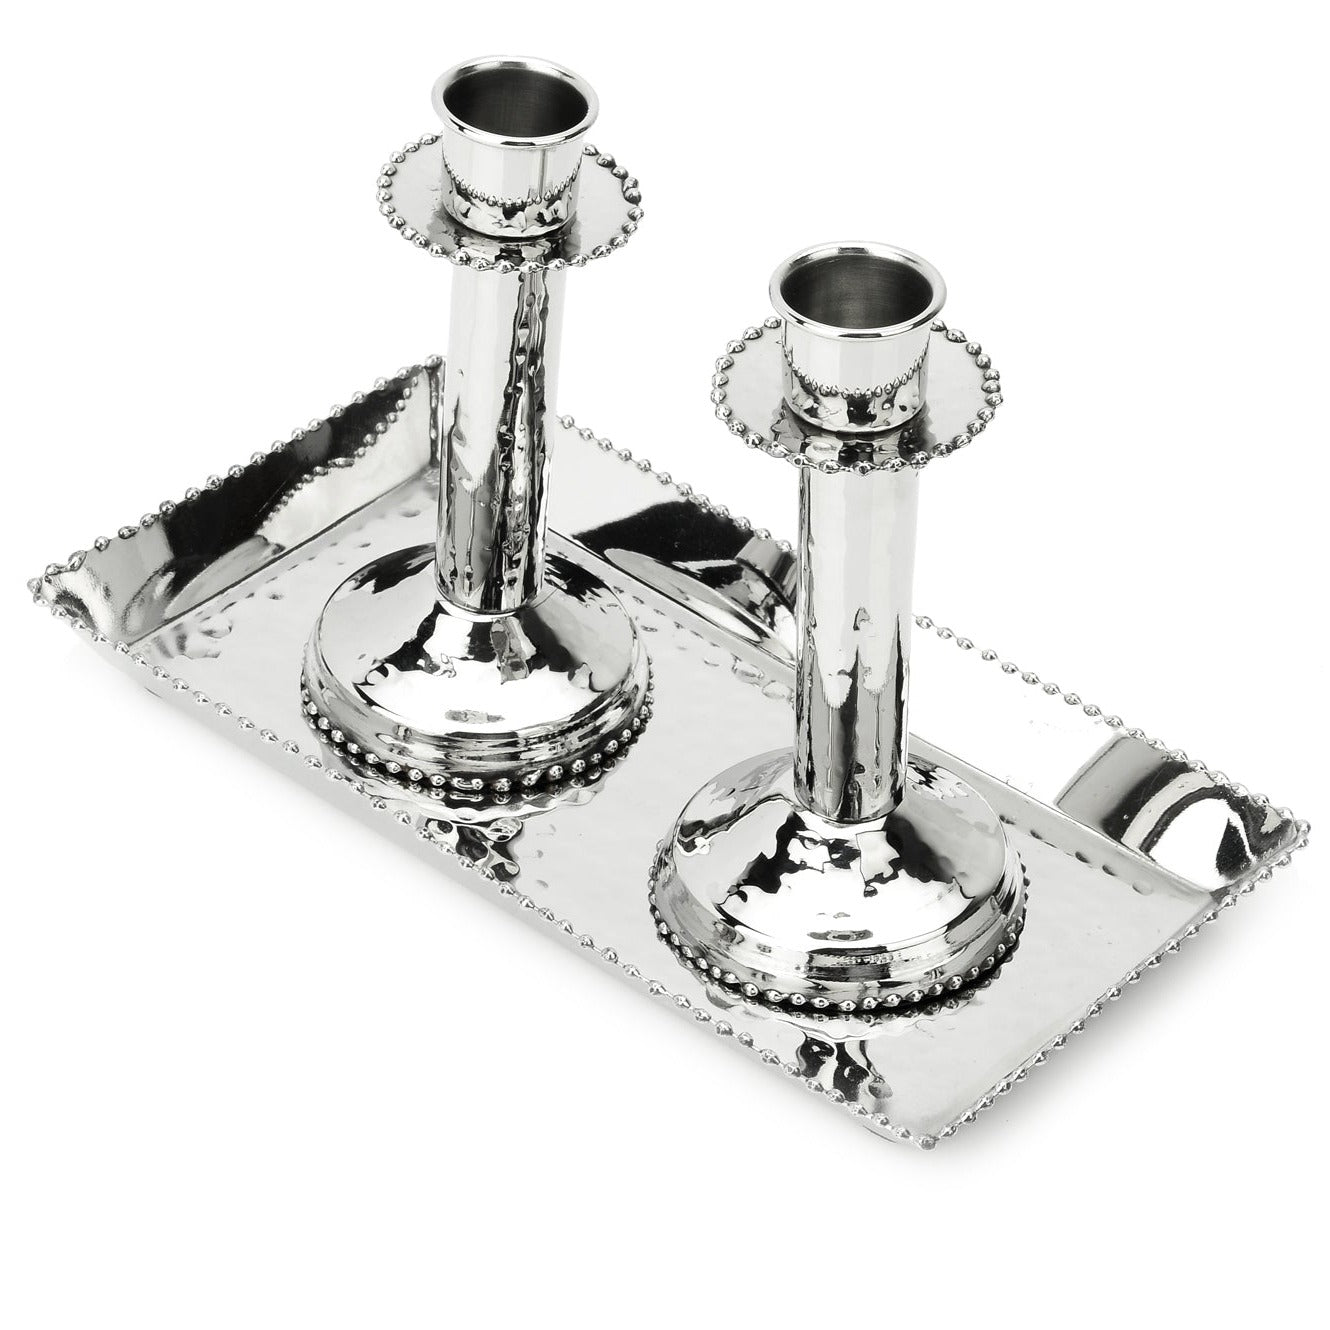 Two Candlesticks with Beaded Design on Tray